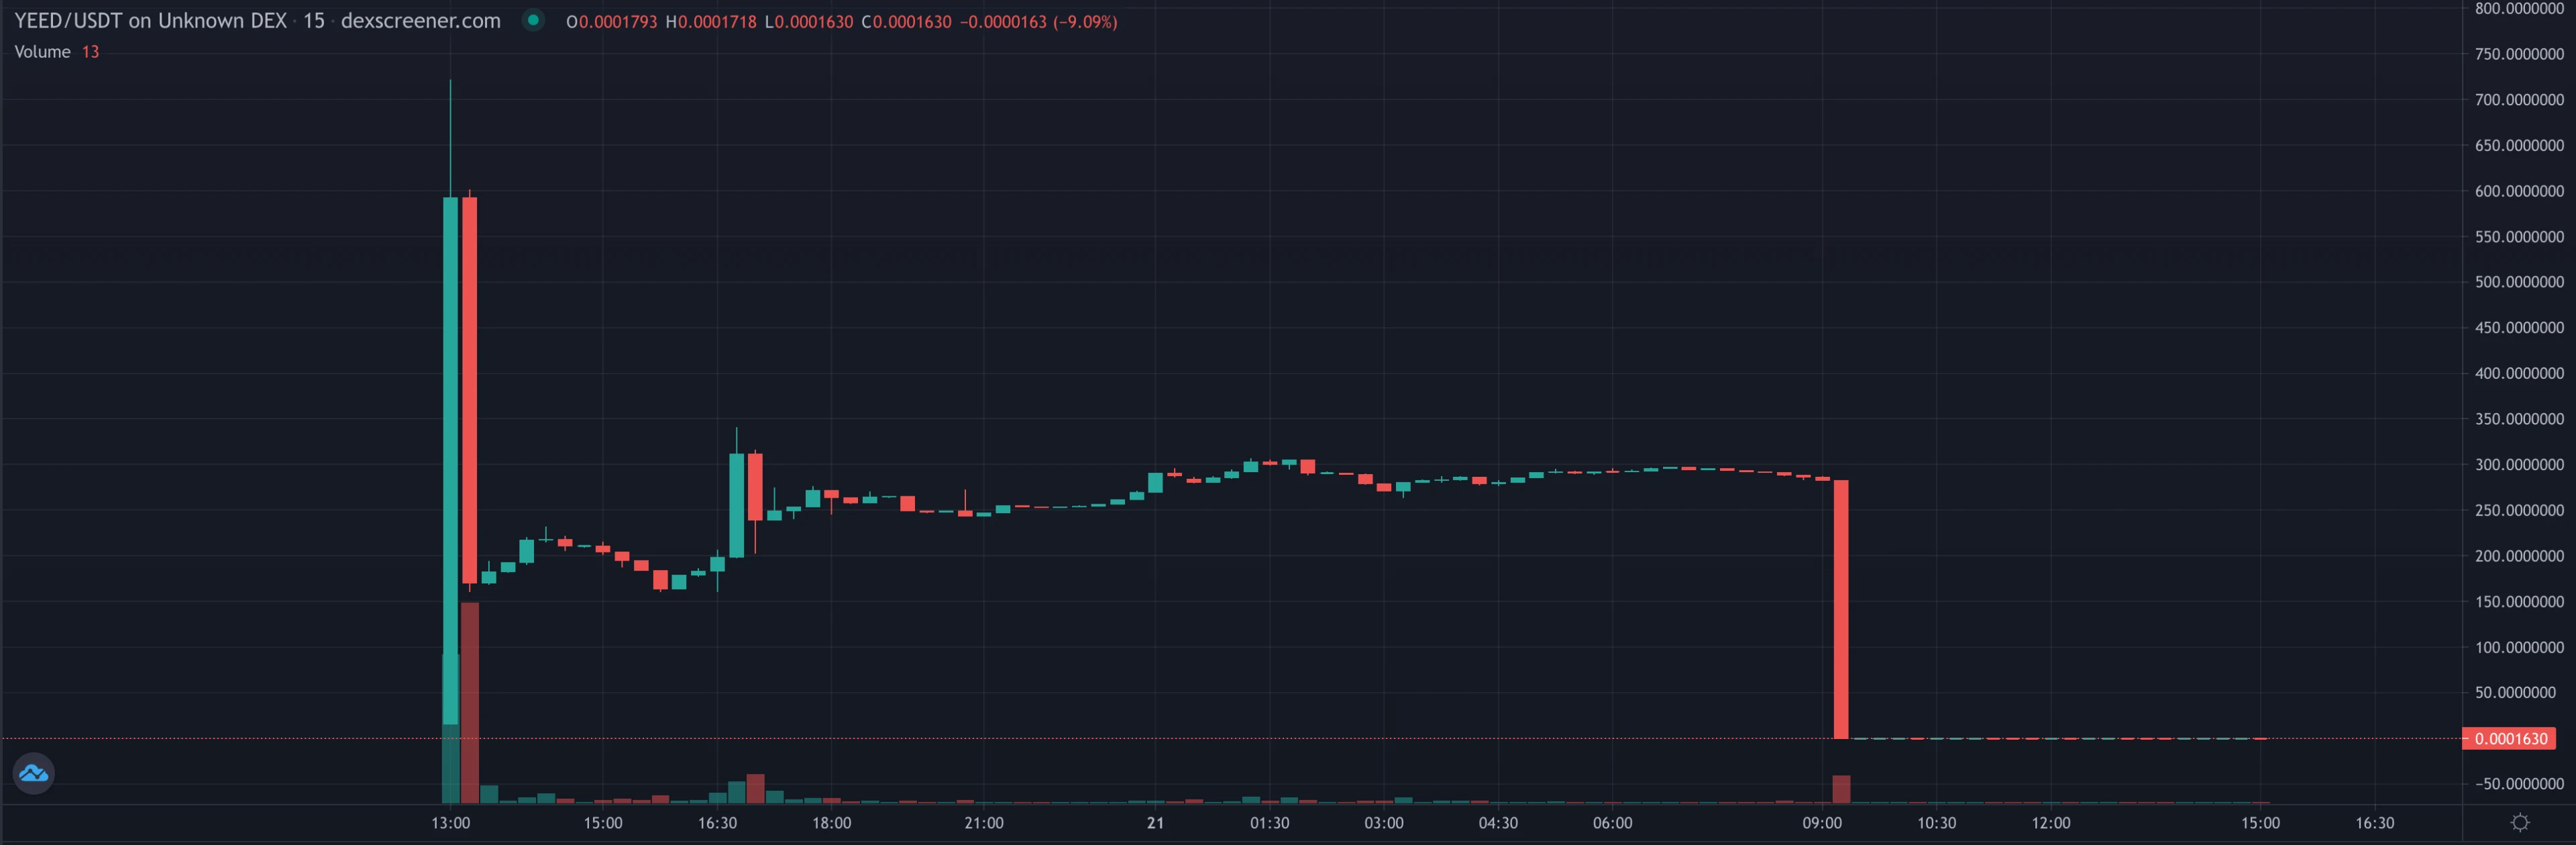 A chart featuring YEED/USDT trading pair